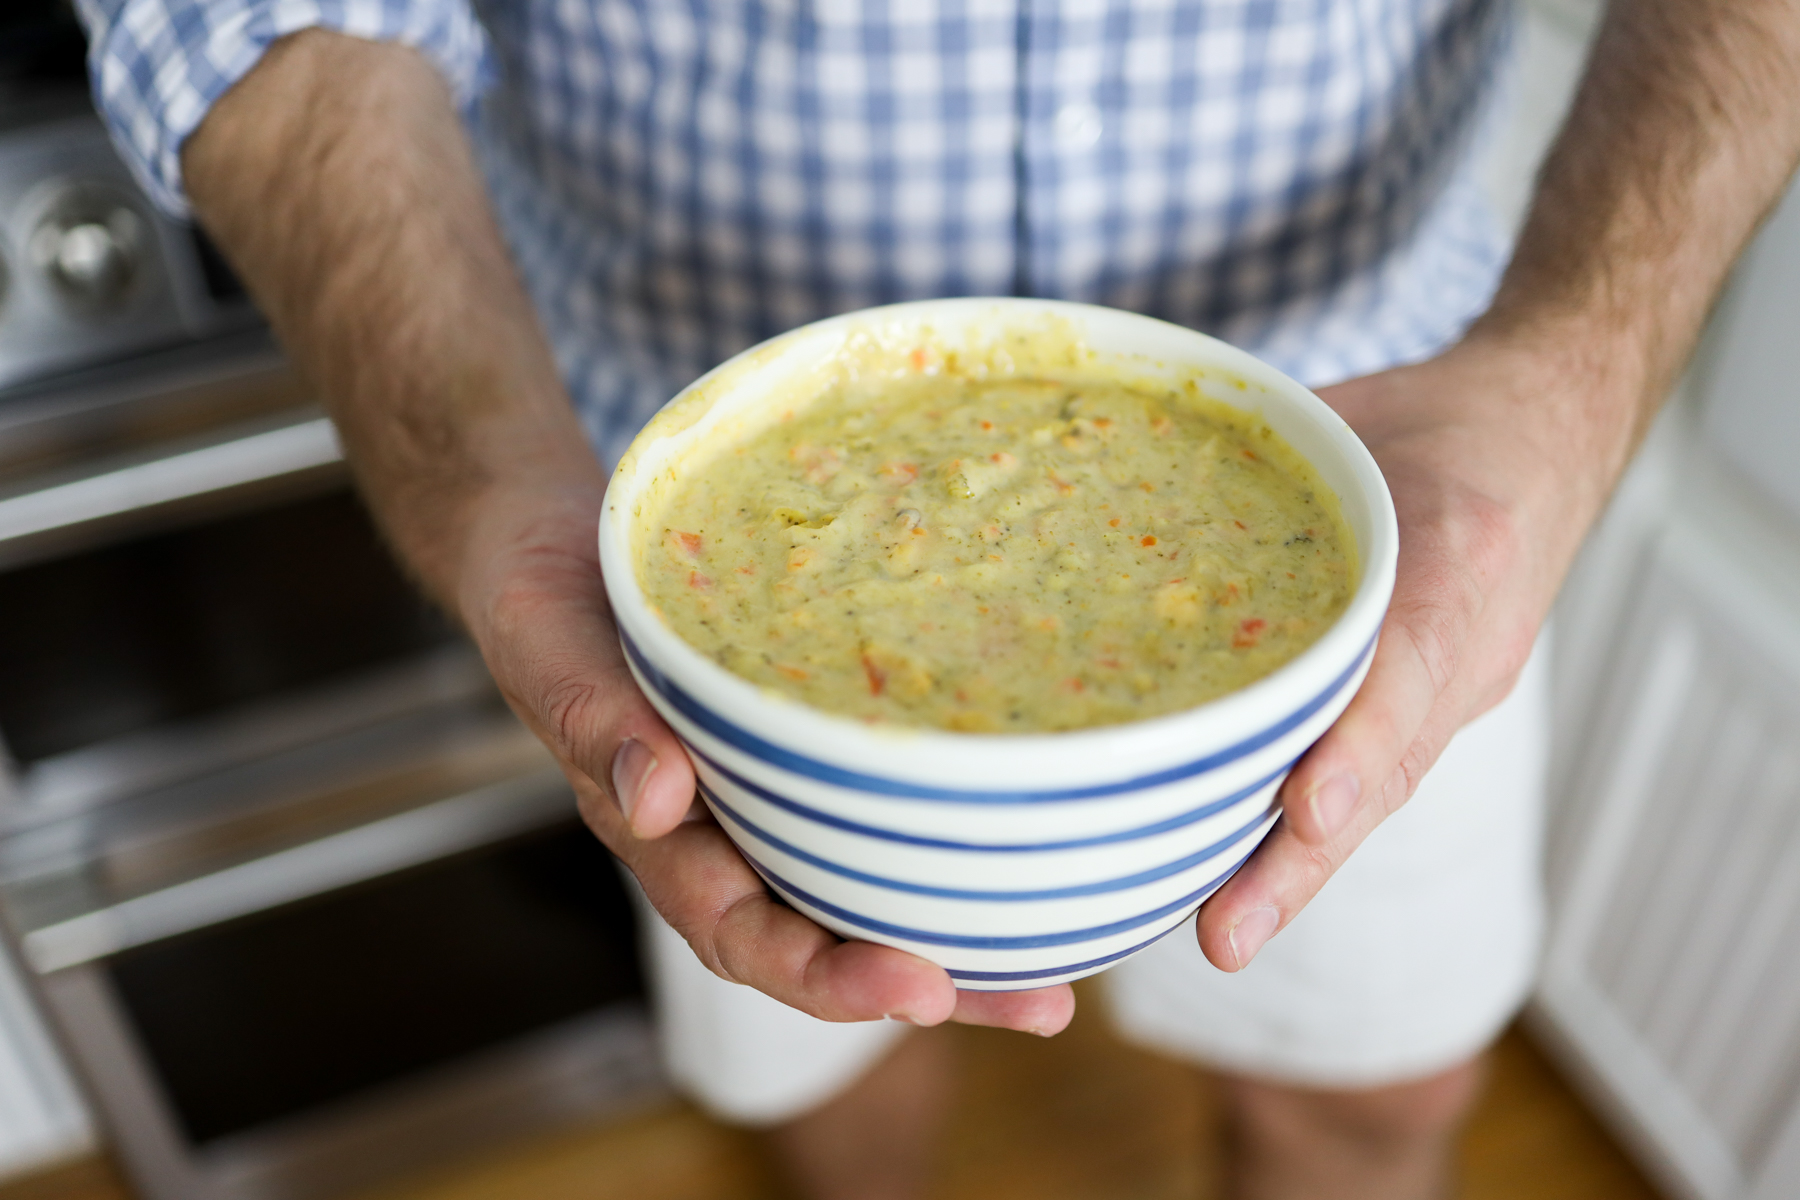 Cookin' with Mitch: Broccoli Cheese Soup - Kelly in the City